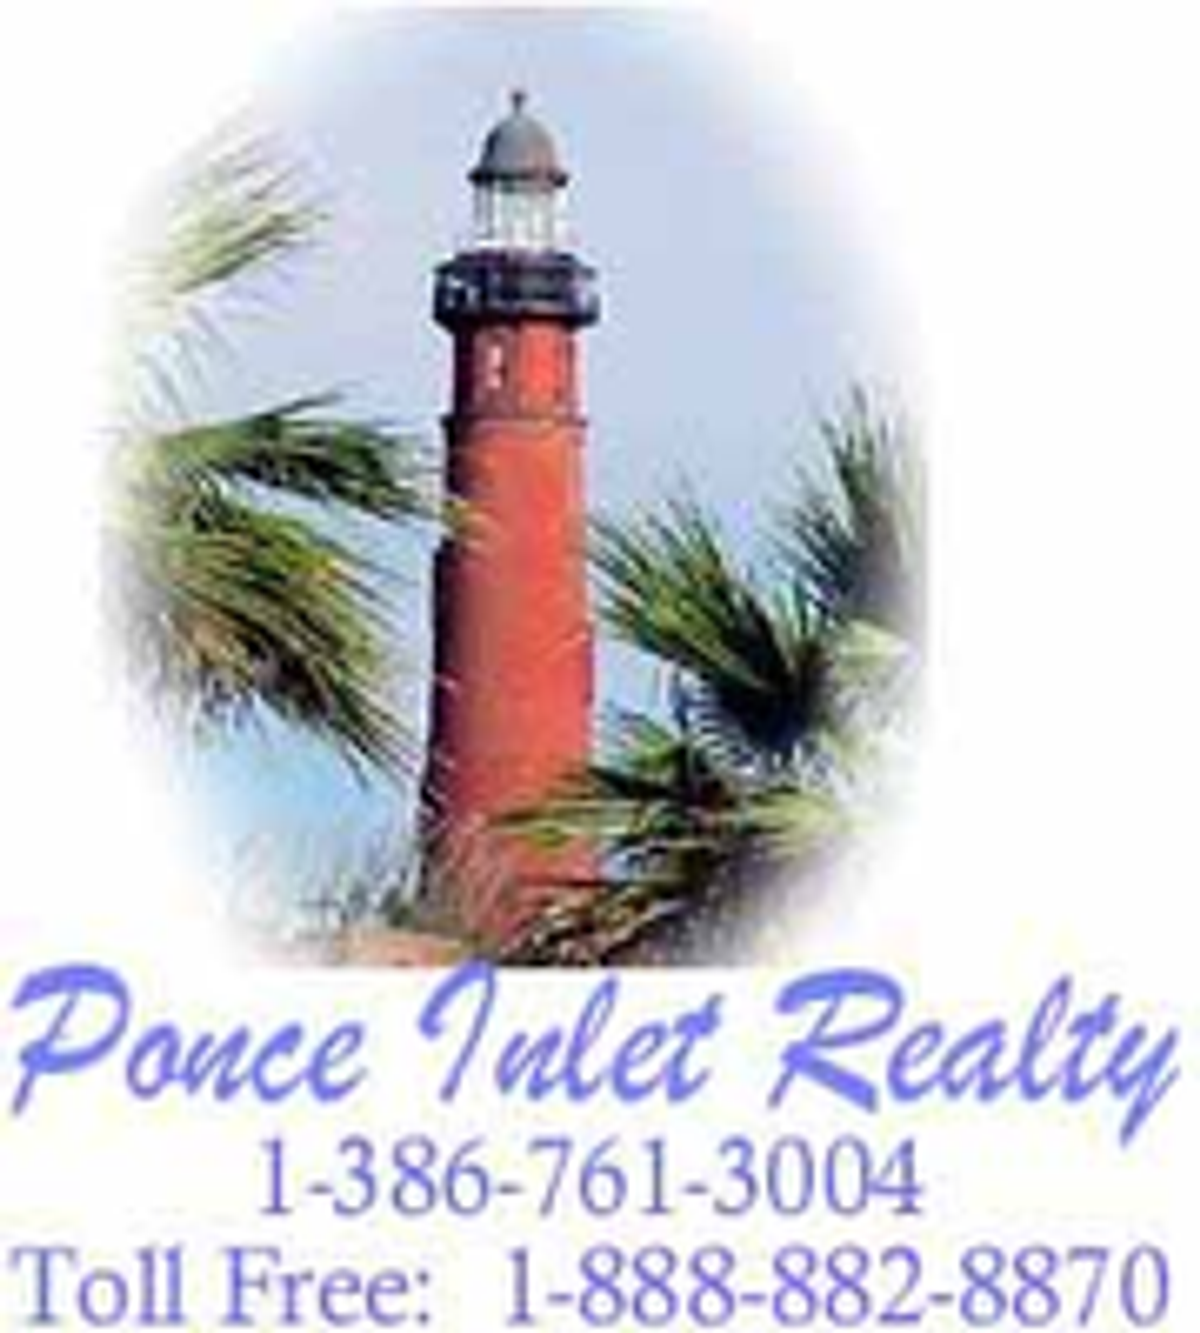 Photo for Angie Koper LLC, Listing Agent at Ponce Inlet Realty, Inc